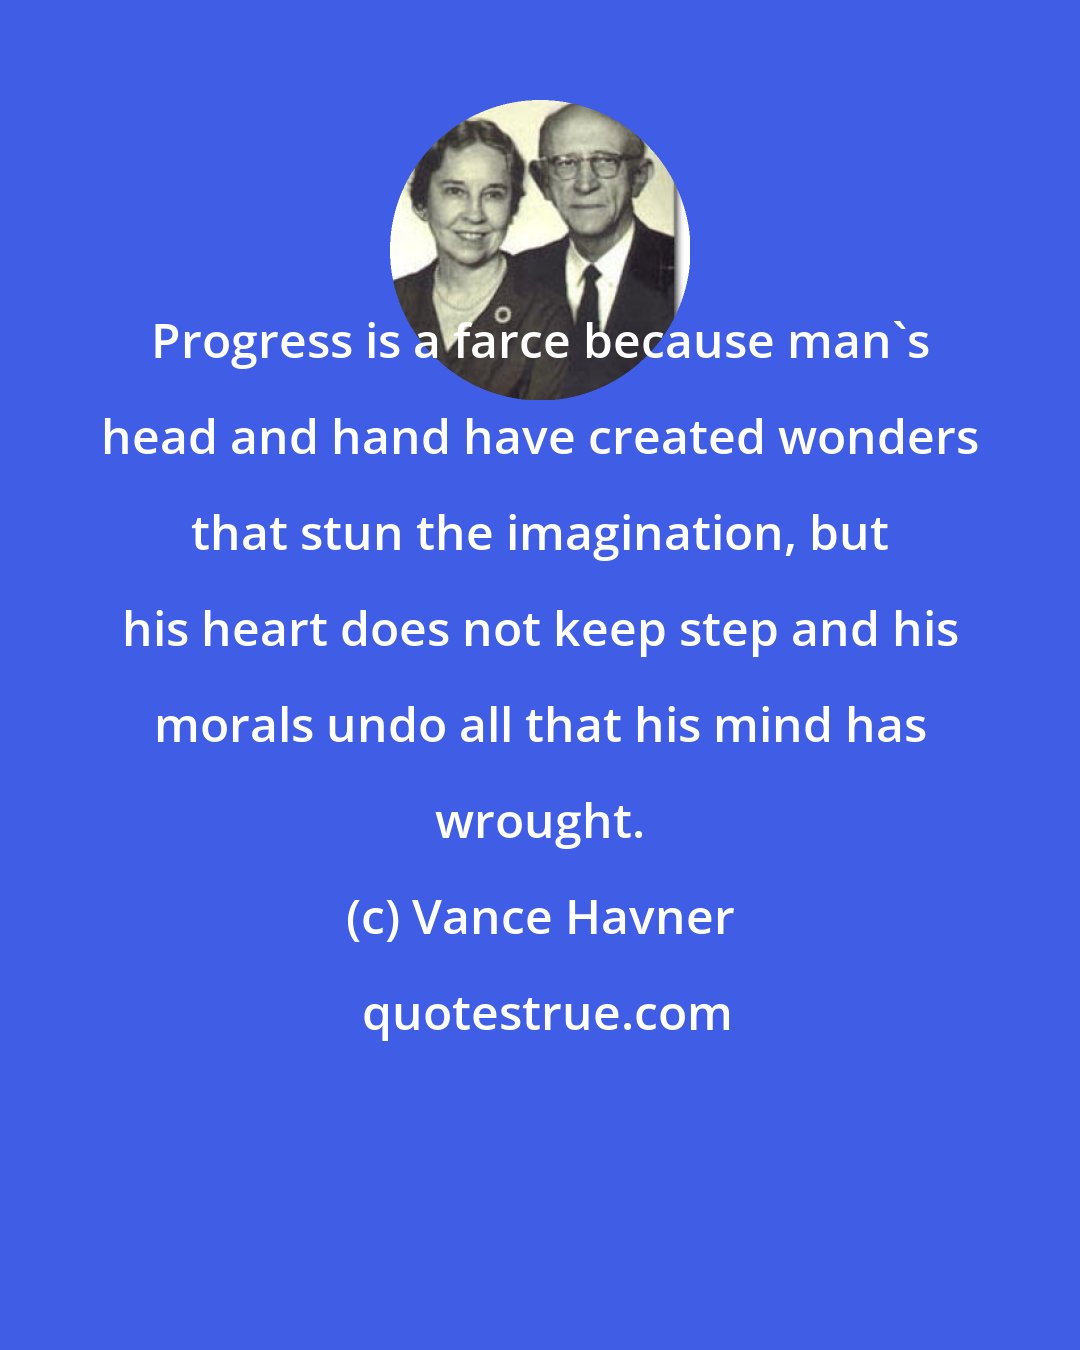 Vance Havner: Progress is a farce because man's head and hand have created wonders that stun the imagination, but his heart does not keep step and his morals undo all that his mind has wrought.